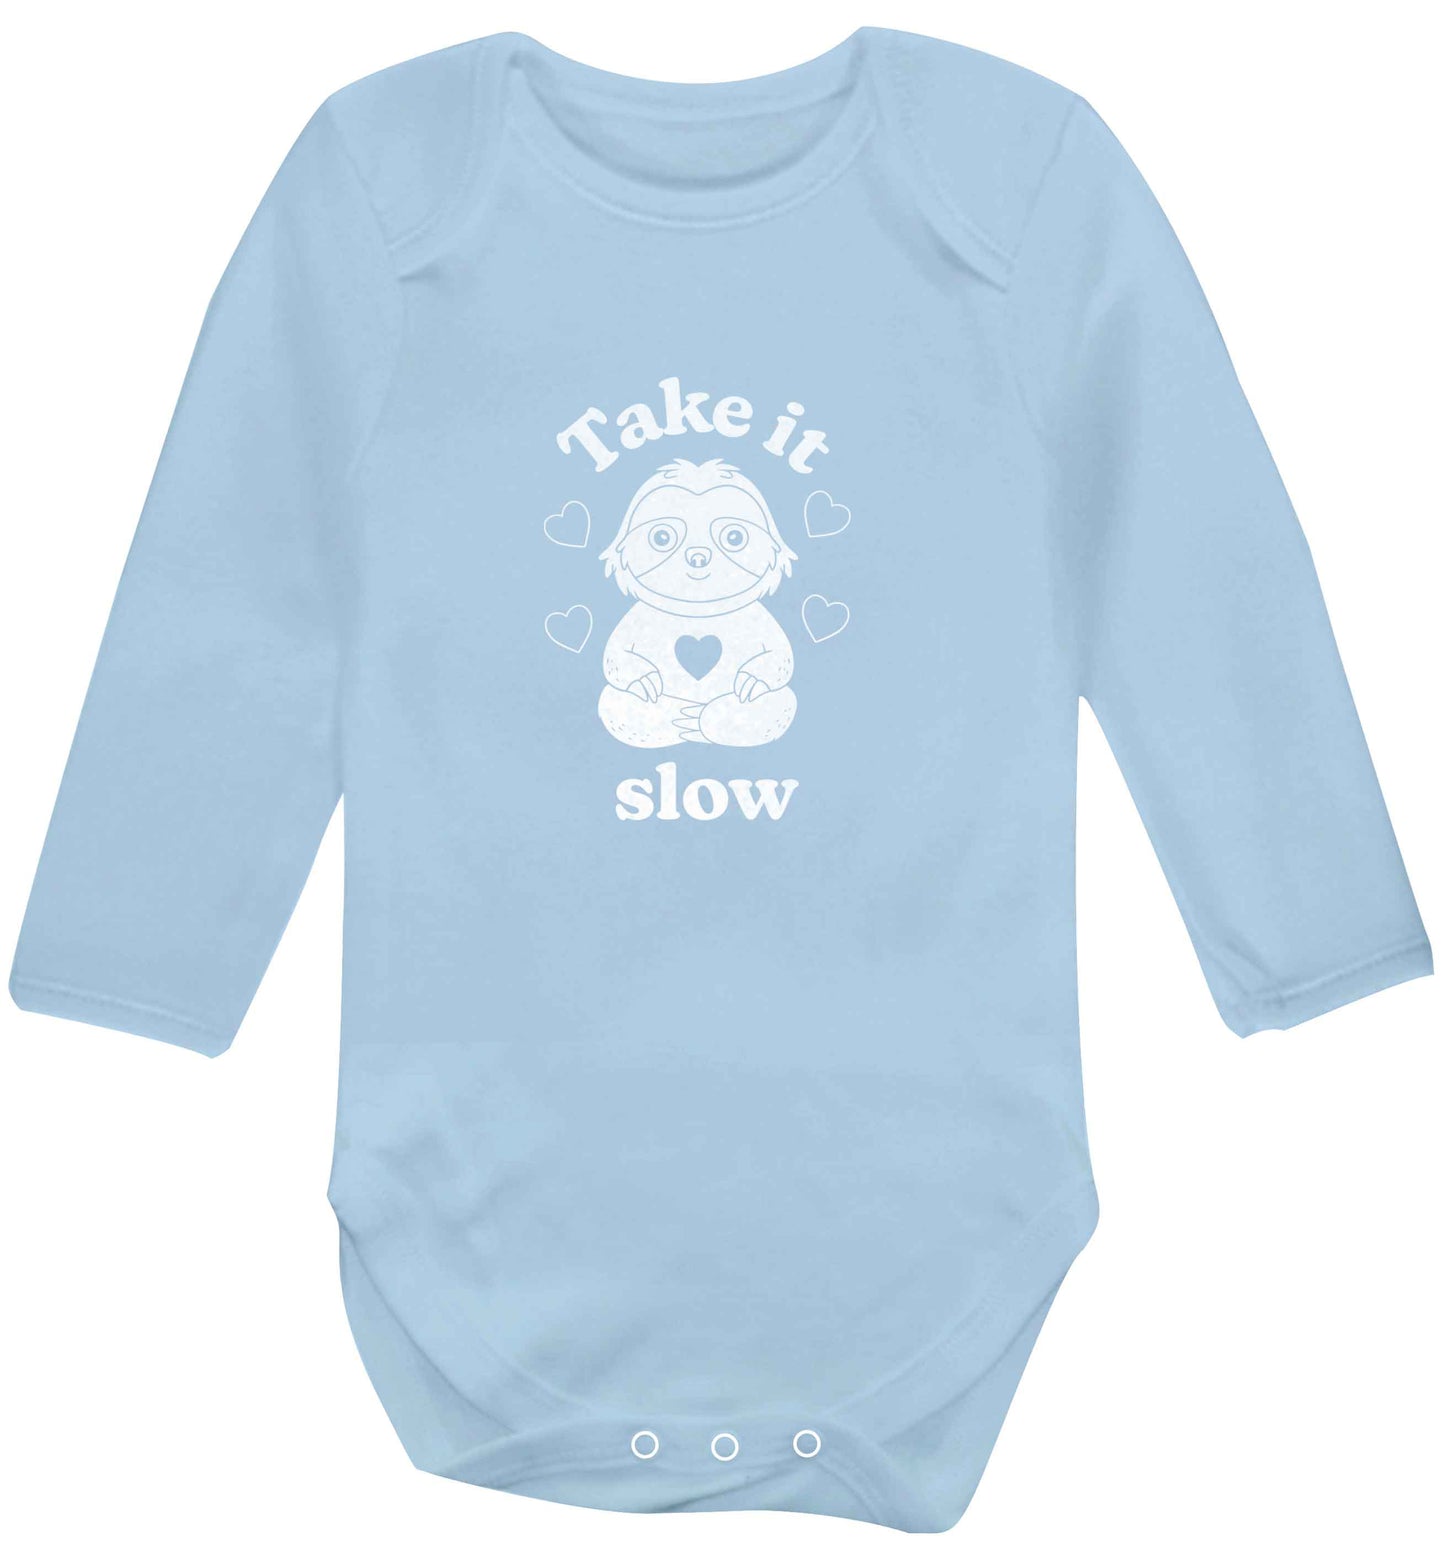 Take it slow baby vest long sleeved pale blue 6-12 months